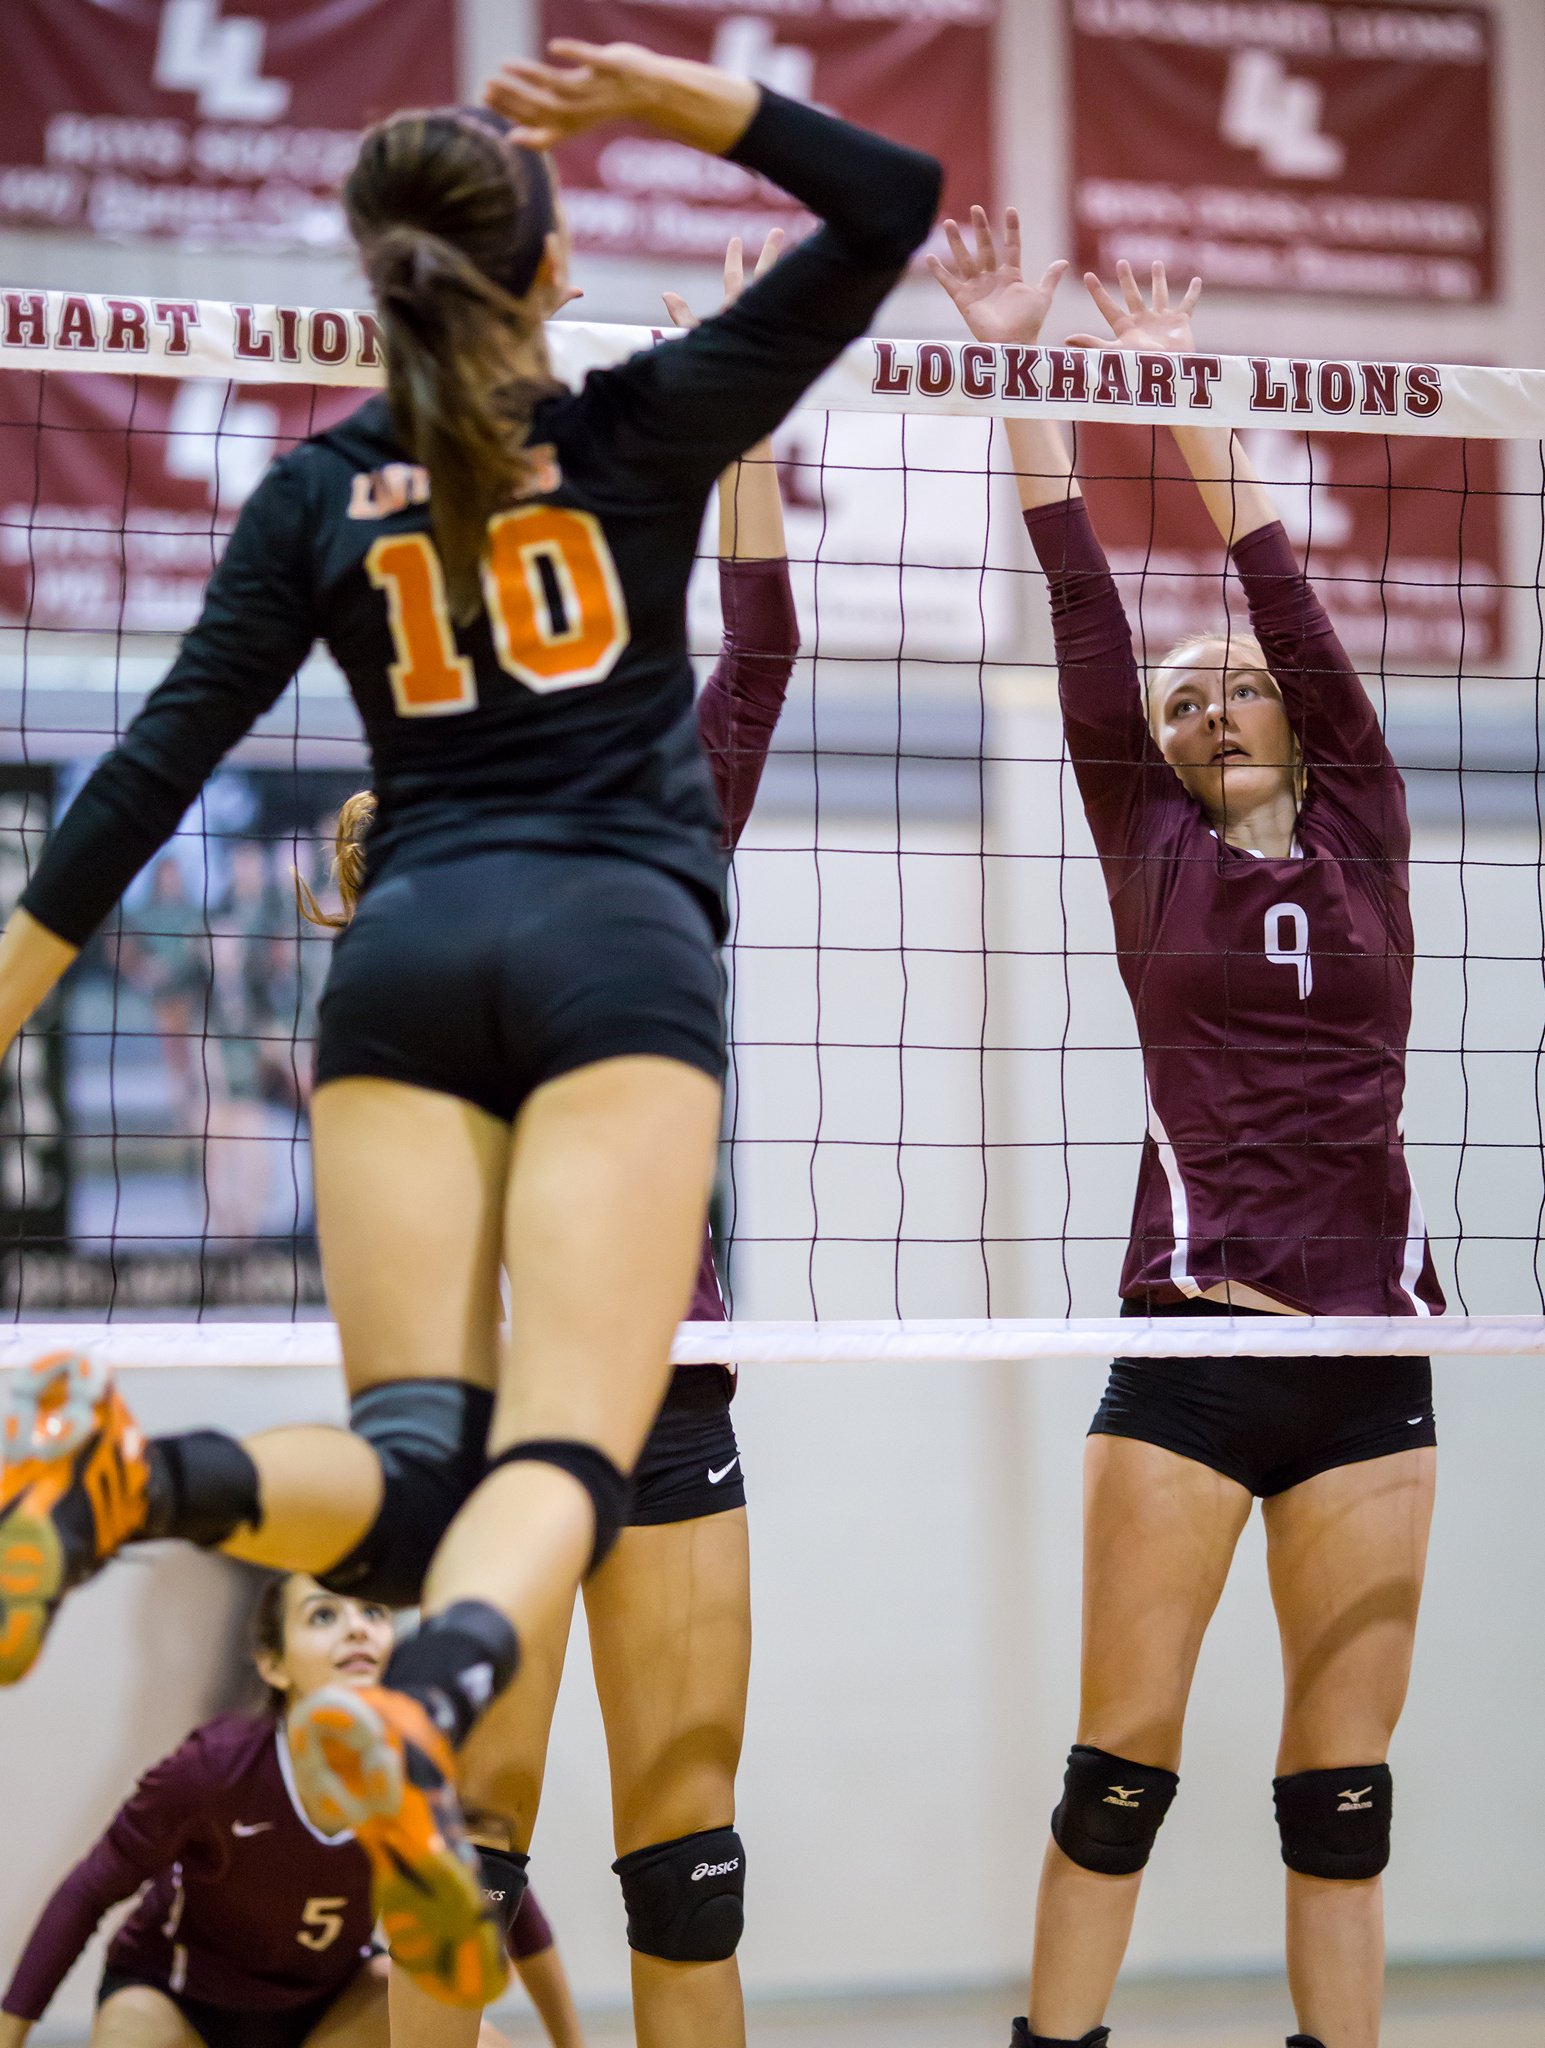 Blocking Tips Volleyball Players Know:
If the blocker correctly "seals the net" then they'd keep their shoulders, hands and arms to close off space between the blocker's hands and the net (Aversen)